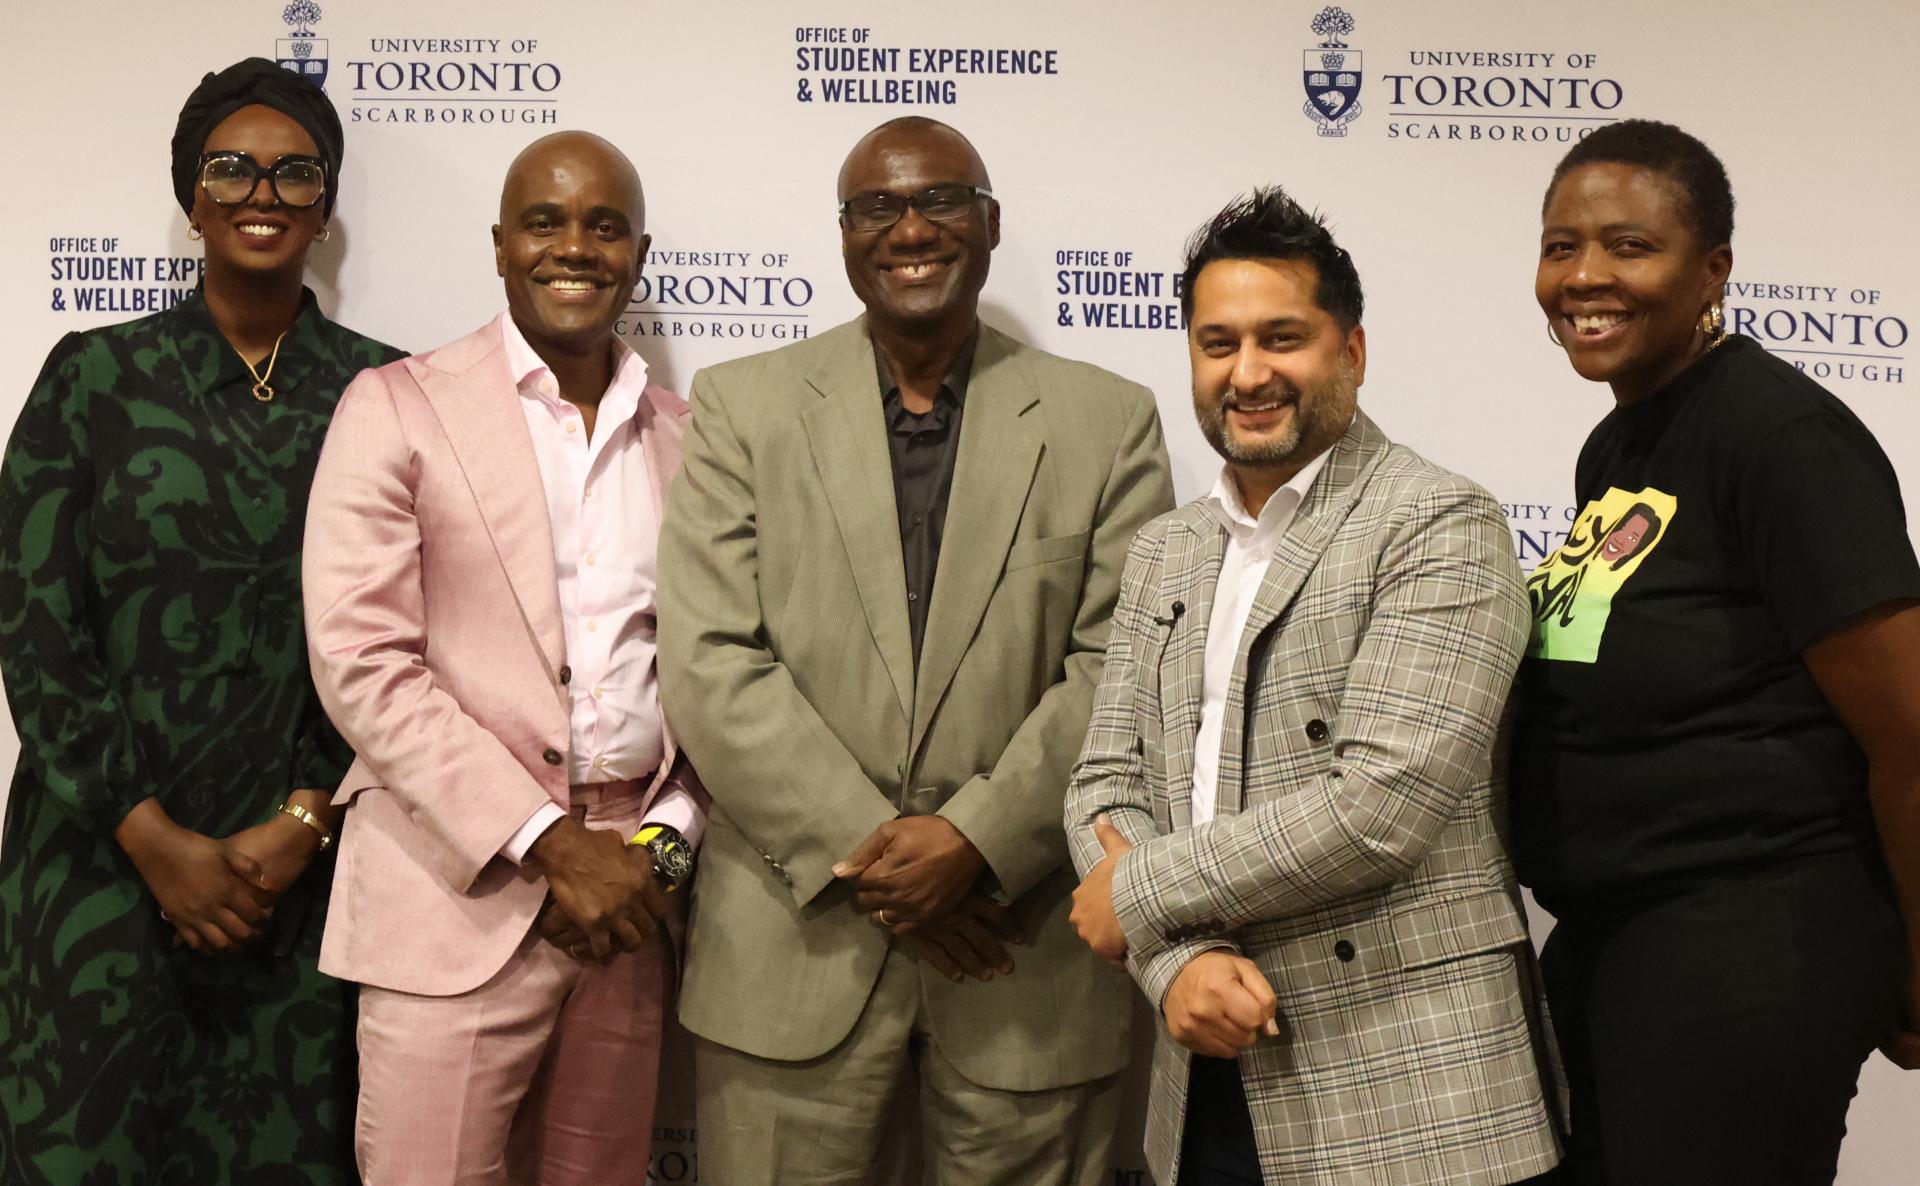 From right to left: Dahabo Ahmed-Omer, executive director of the BlackNorth Initiative; Wes Hall, founder of Kingsdale Advisors and the Black North Initiative; Professor Wisdom Tettey, U of T vice-president and principal of U of T Scarborough; Neel Joshi, dean of student experience and wellbeing; Carlene Honigan, founder of Patty Gyal.  